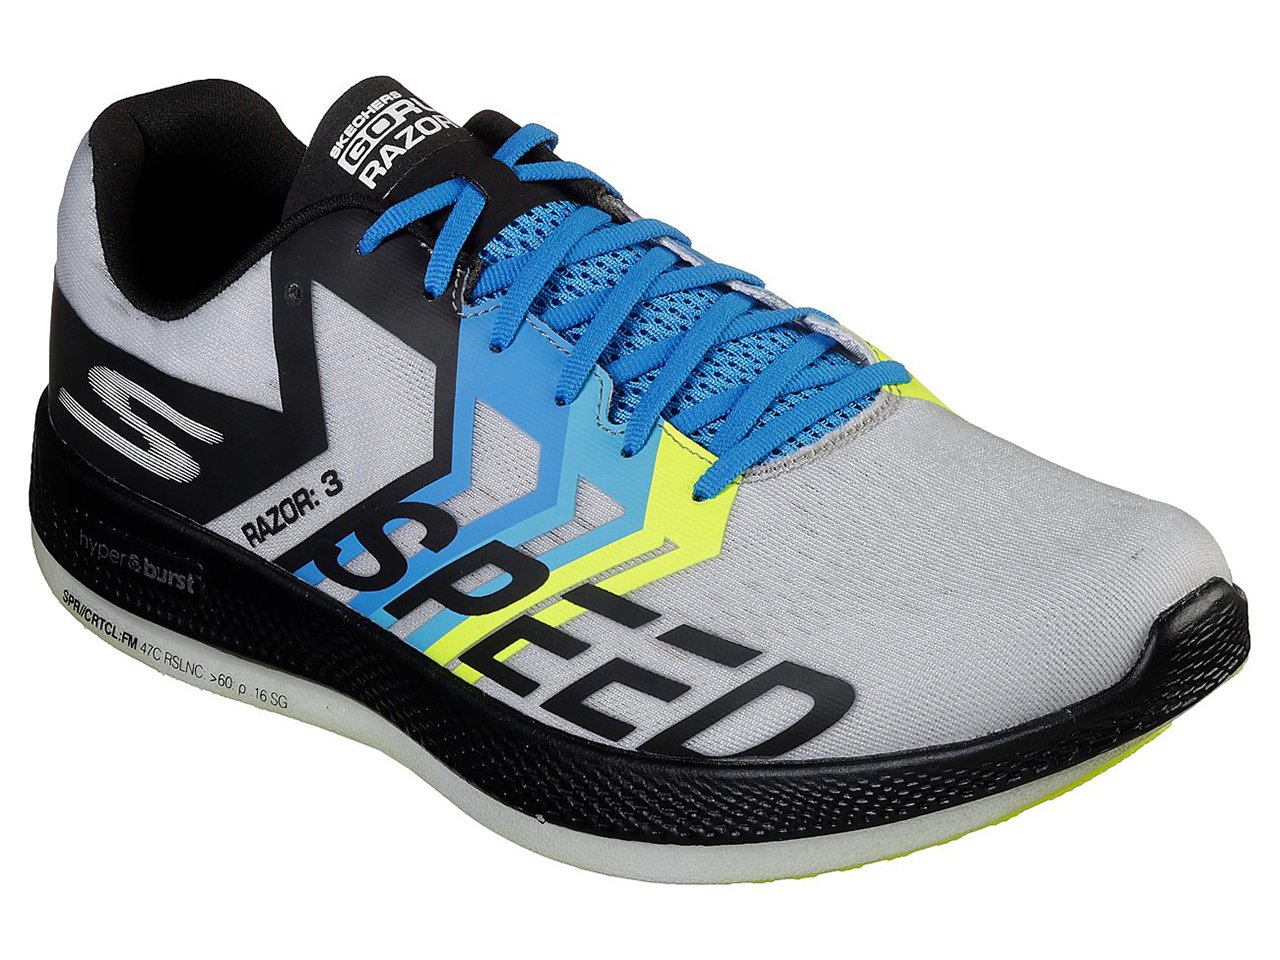 Great running shoes: GORUN RAZOR 3 HYPER shoe in grey with blue/lime details